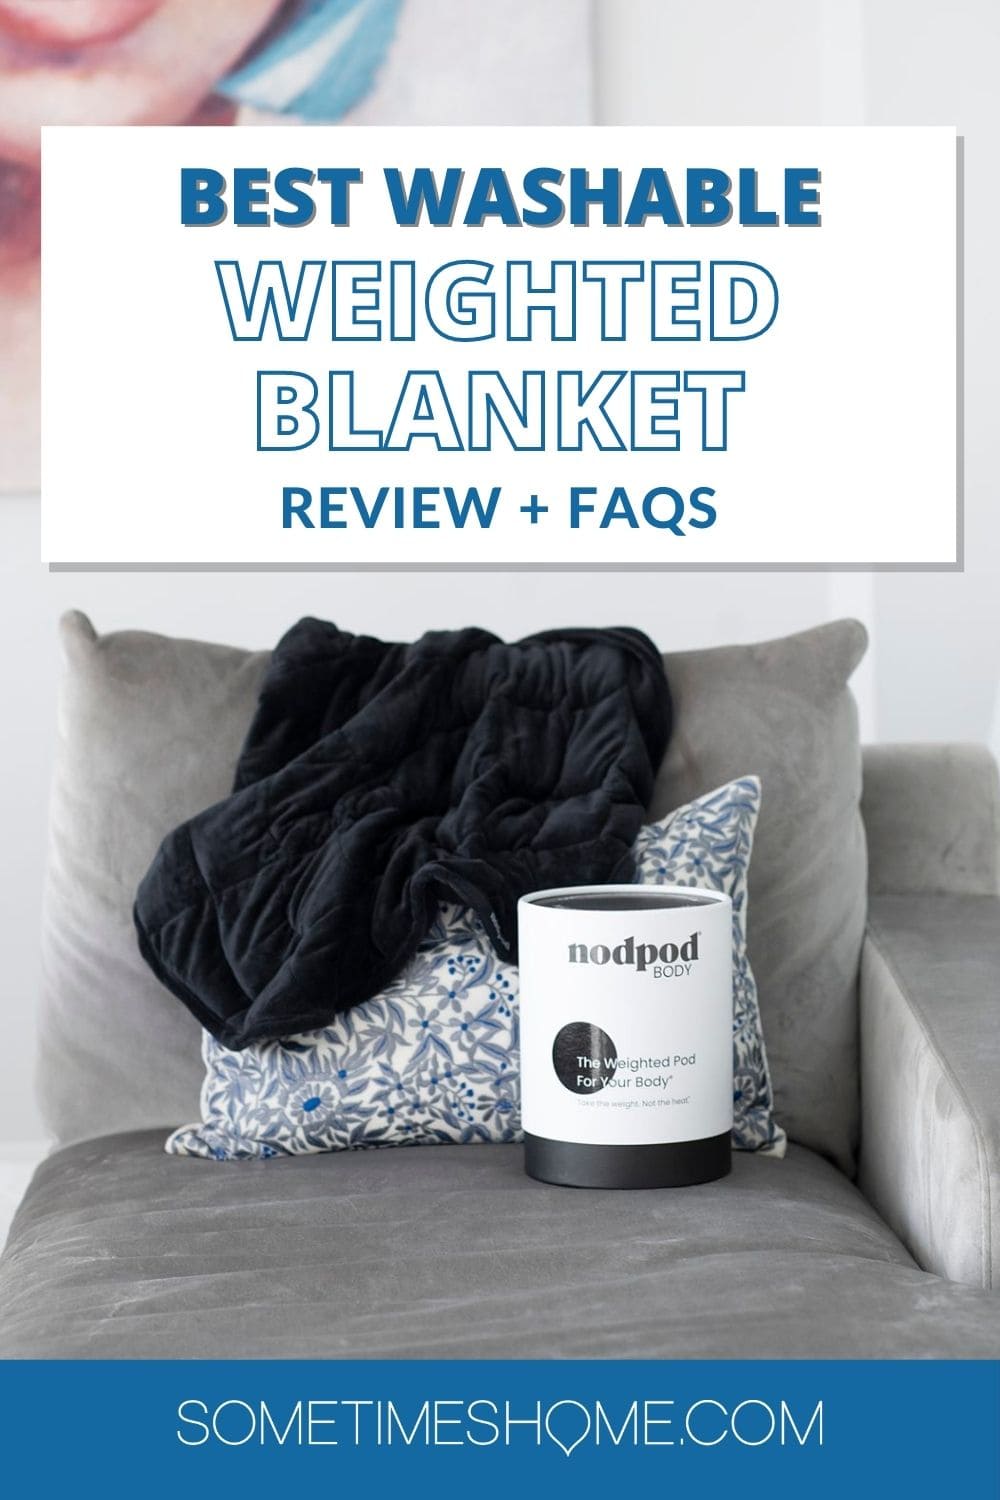 Best washable weighted blanket pin graphic with a picture of the product on a couch with the packaging next to it.